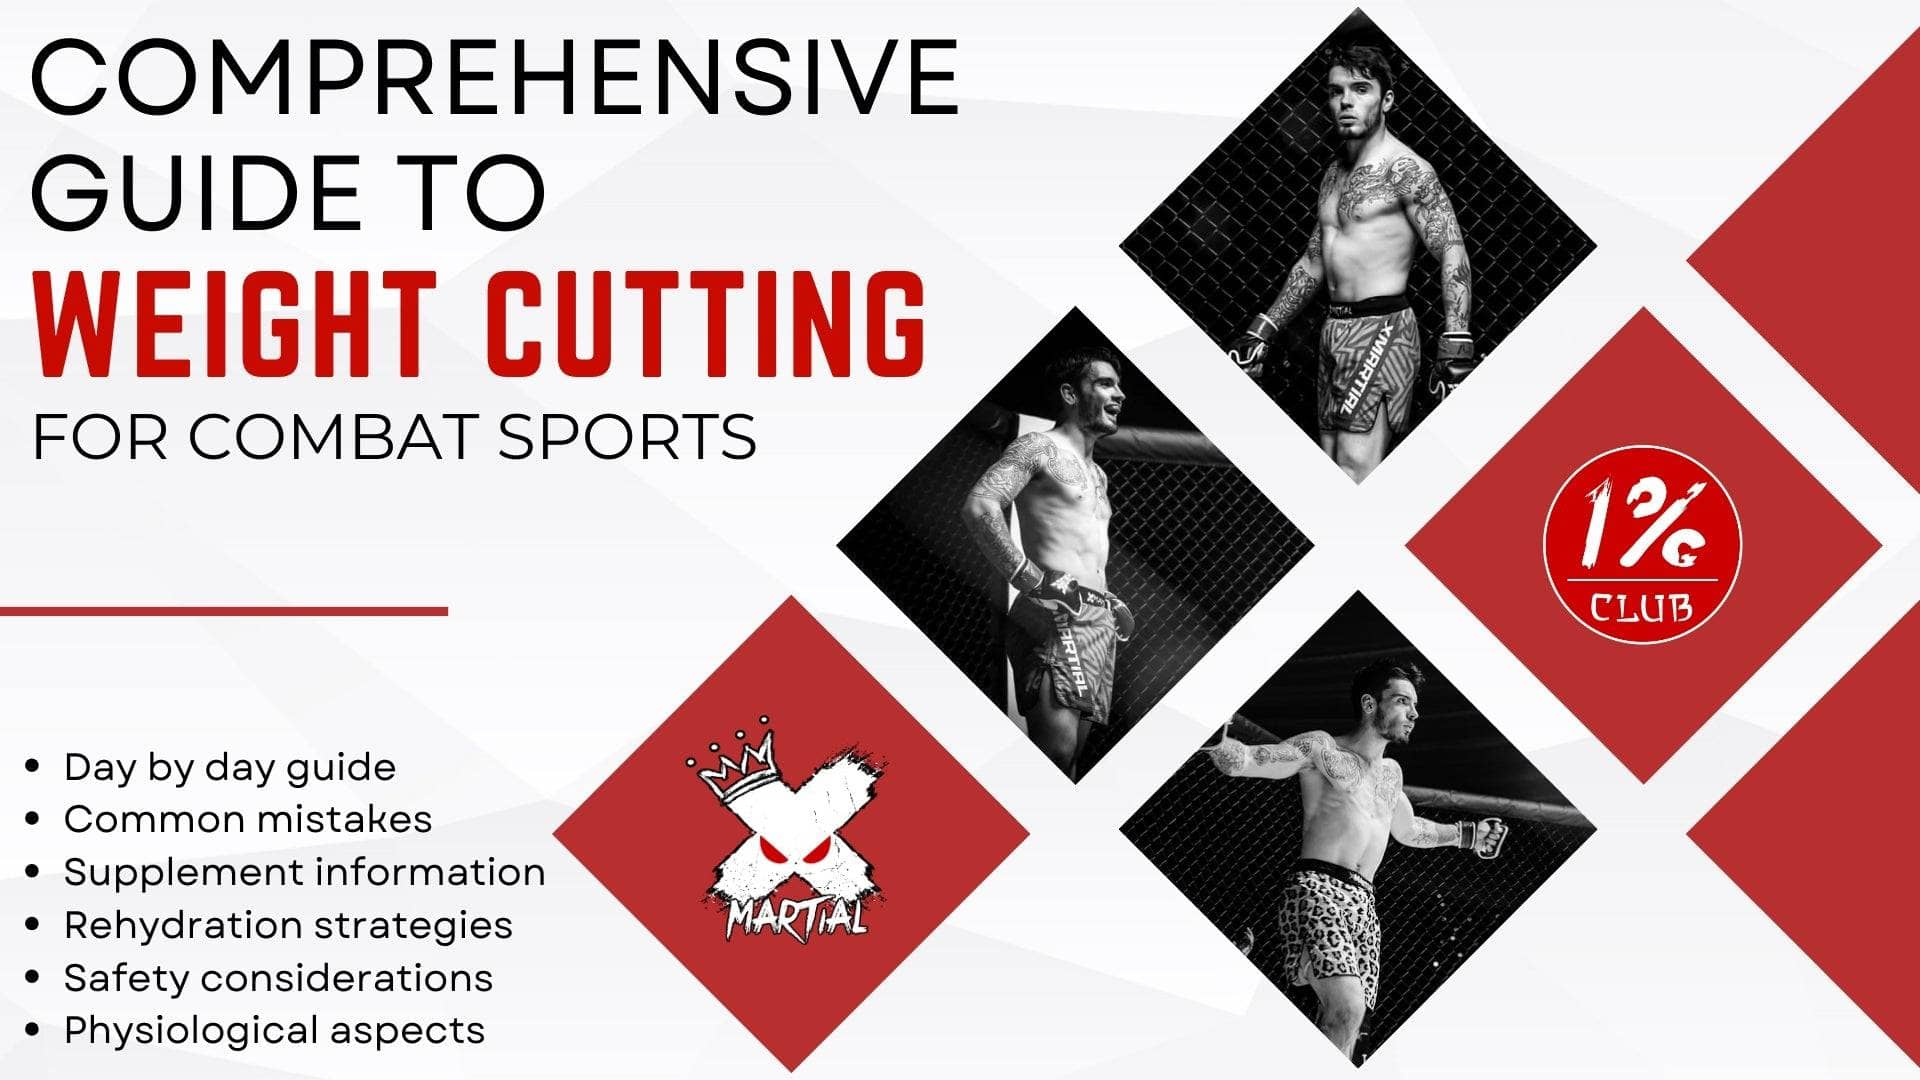 Comprehensive Guide to Weight Cutting XMARTIAL